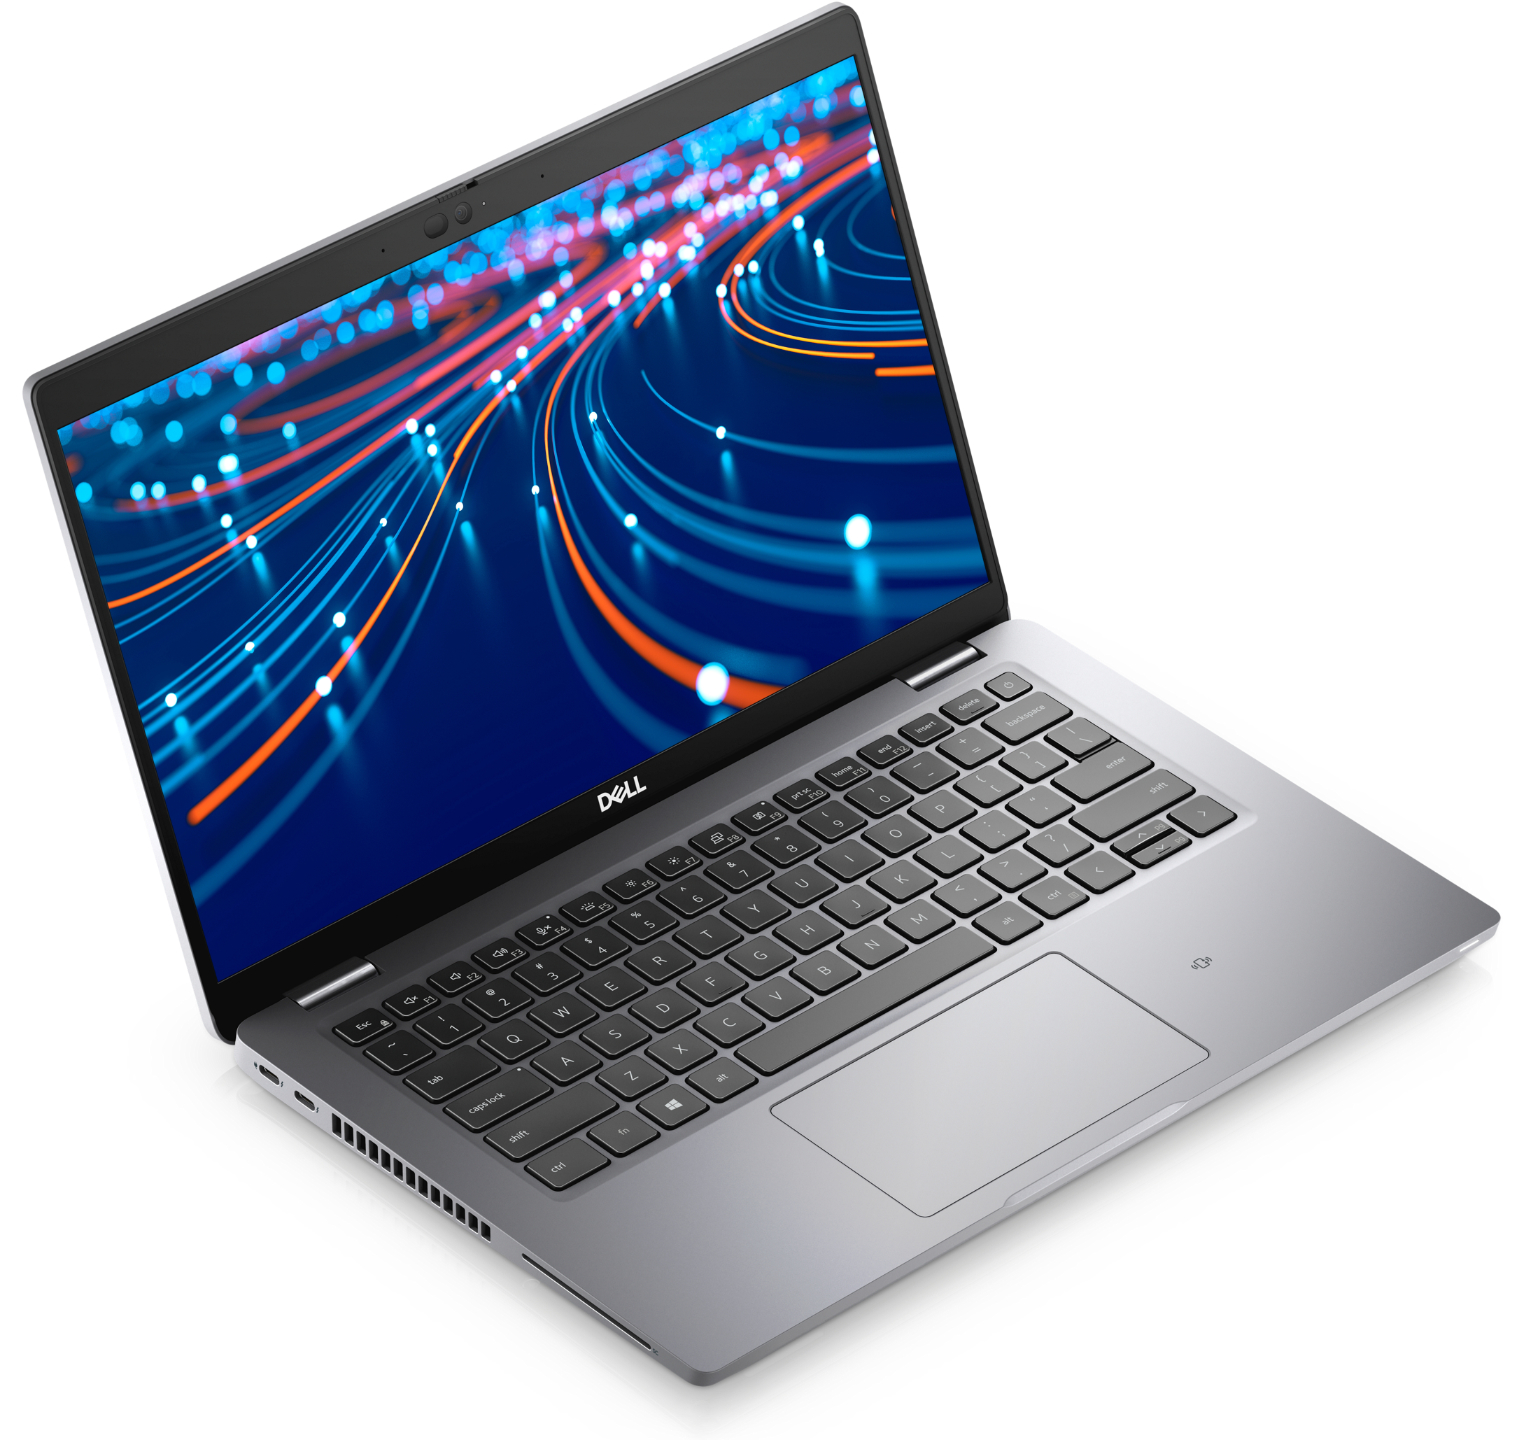 Dell Latitude 5430: 14-inch laptop refreshed with Intel Alder Lake processors and numerous display options - NotebookCheck.net News